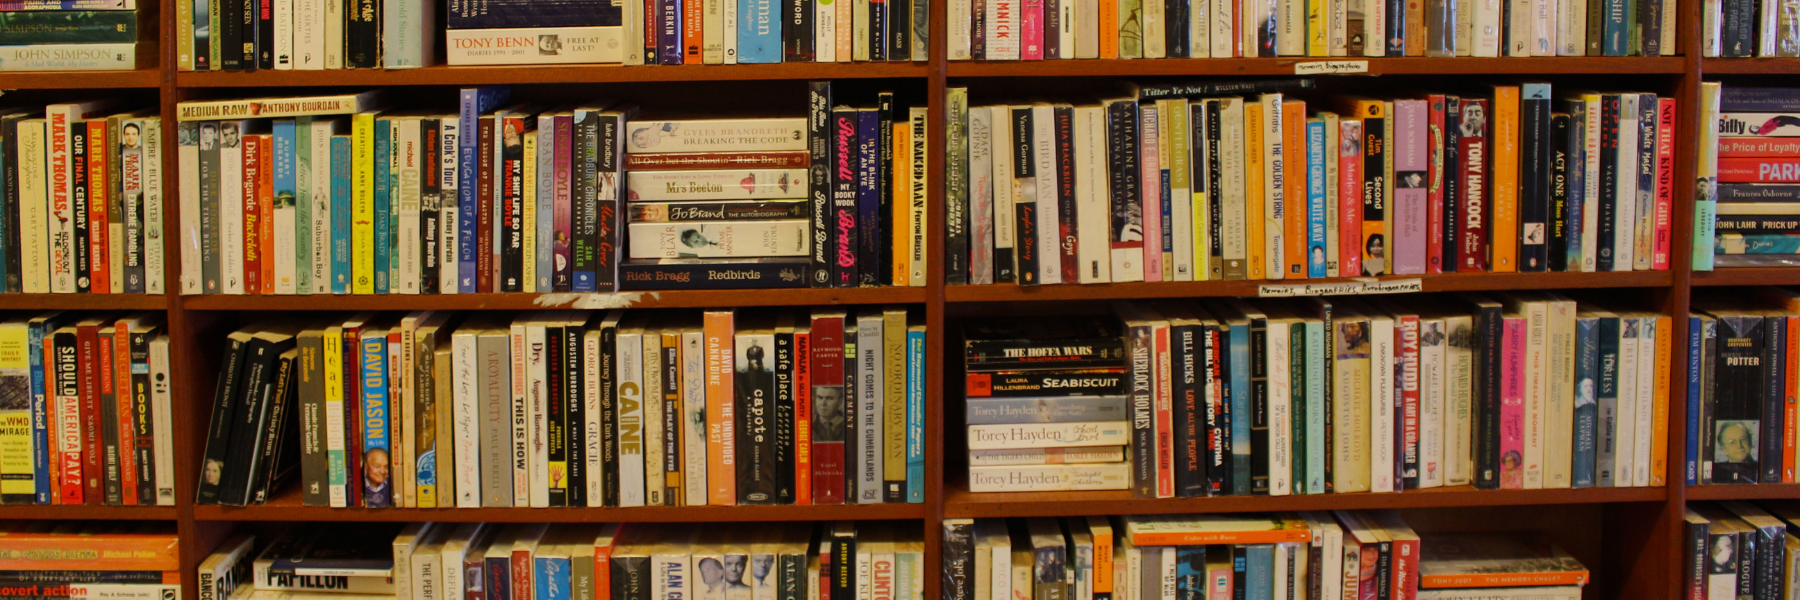 Five Creative Strategies for Keeping Your Book Collection Organized-reading vintage